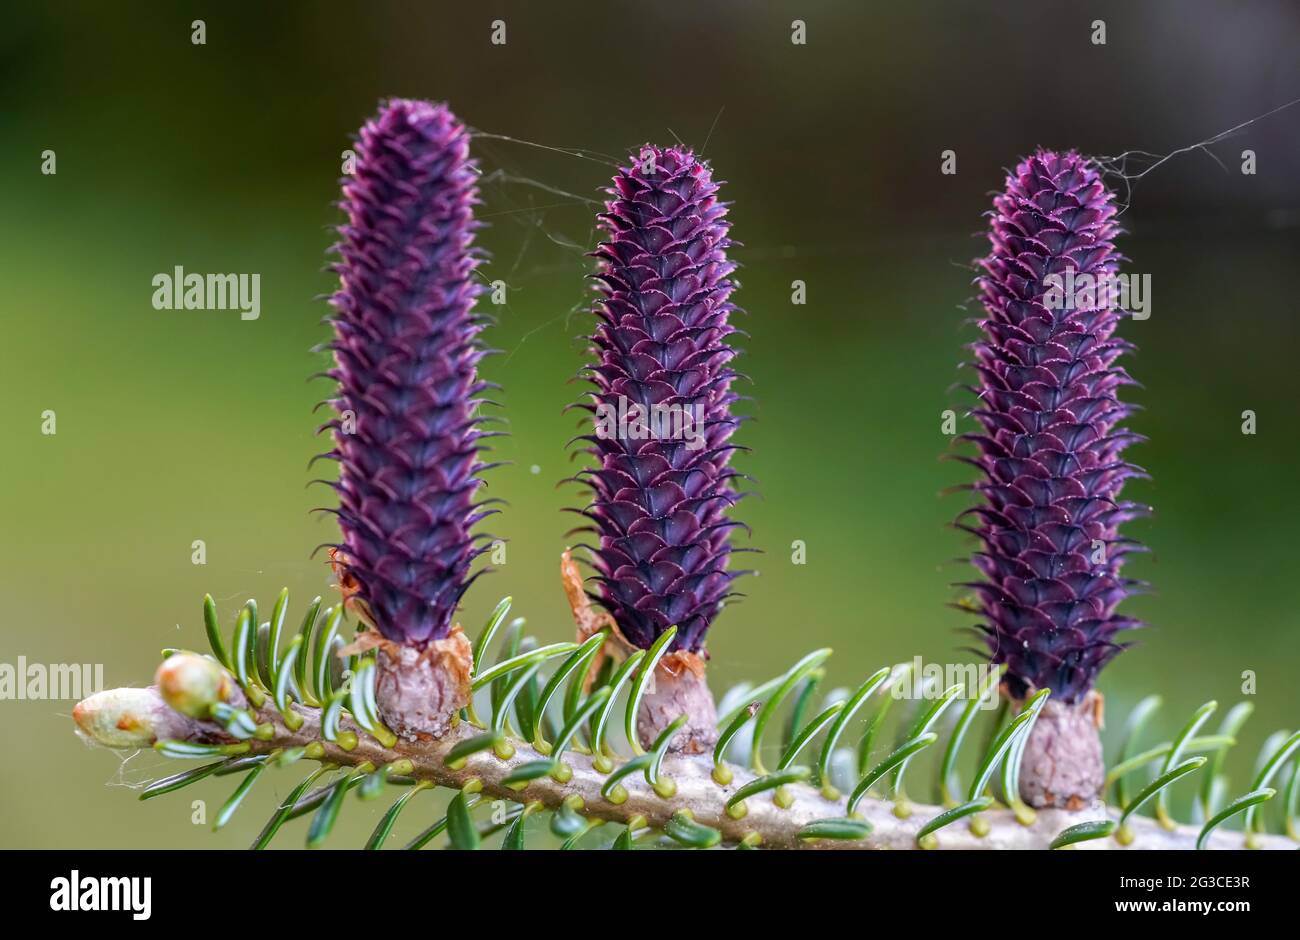 Young purple spruce (abies species) cones growing on branch with fir, closeup detail Stock Photo